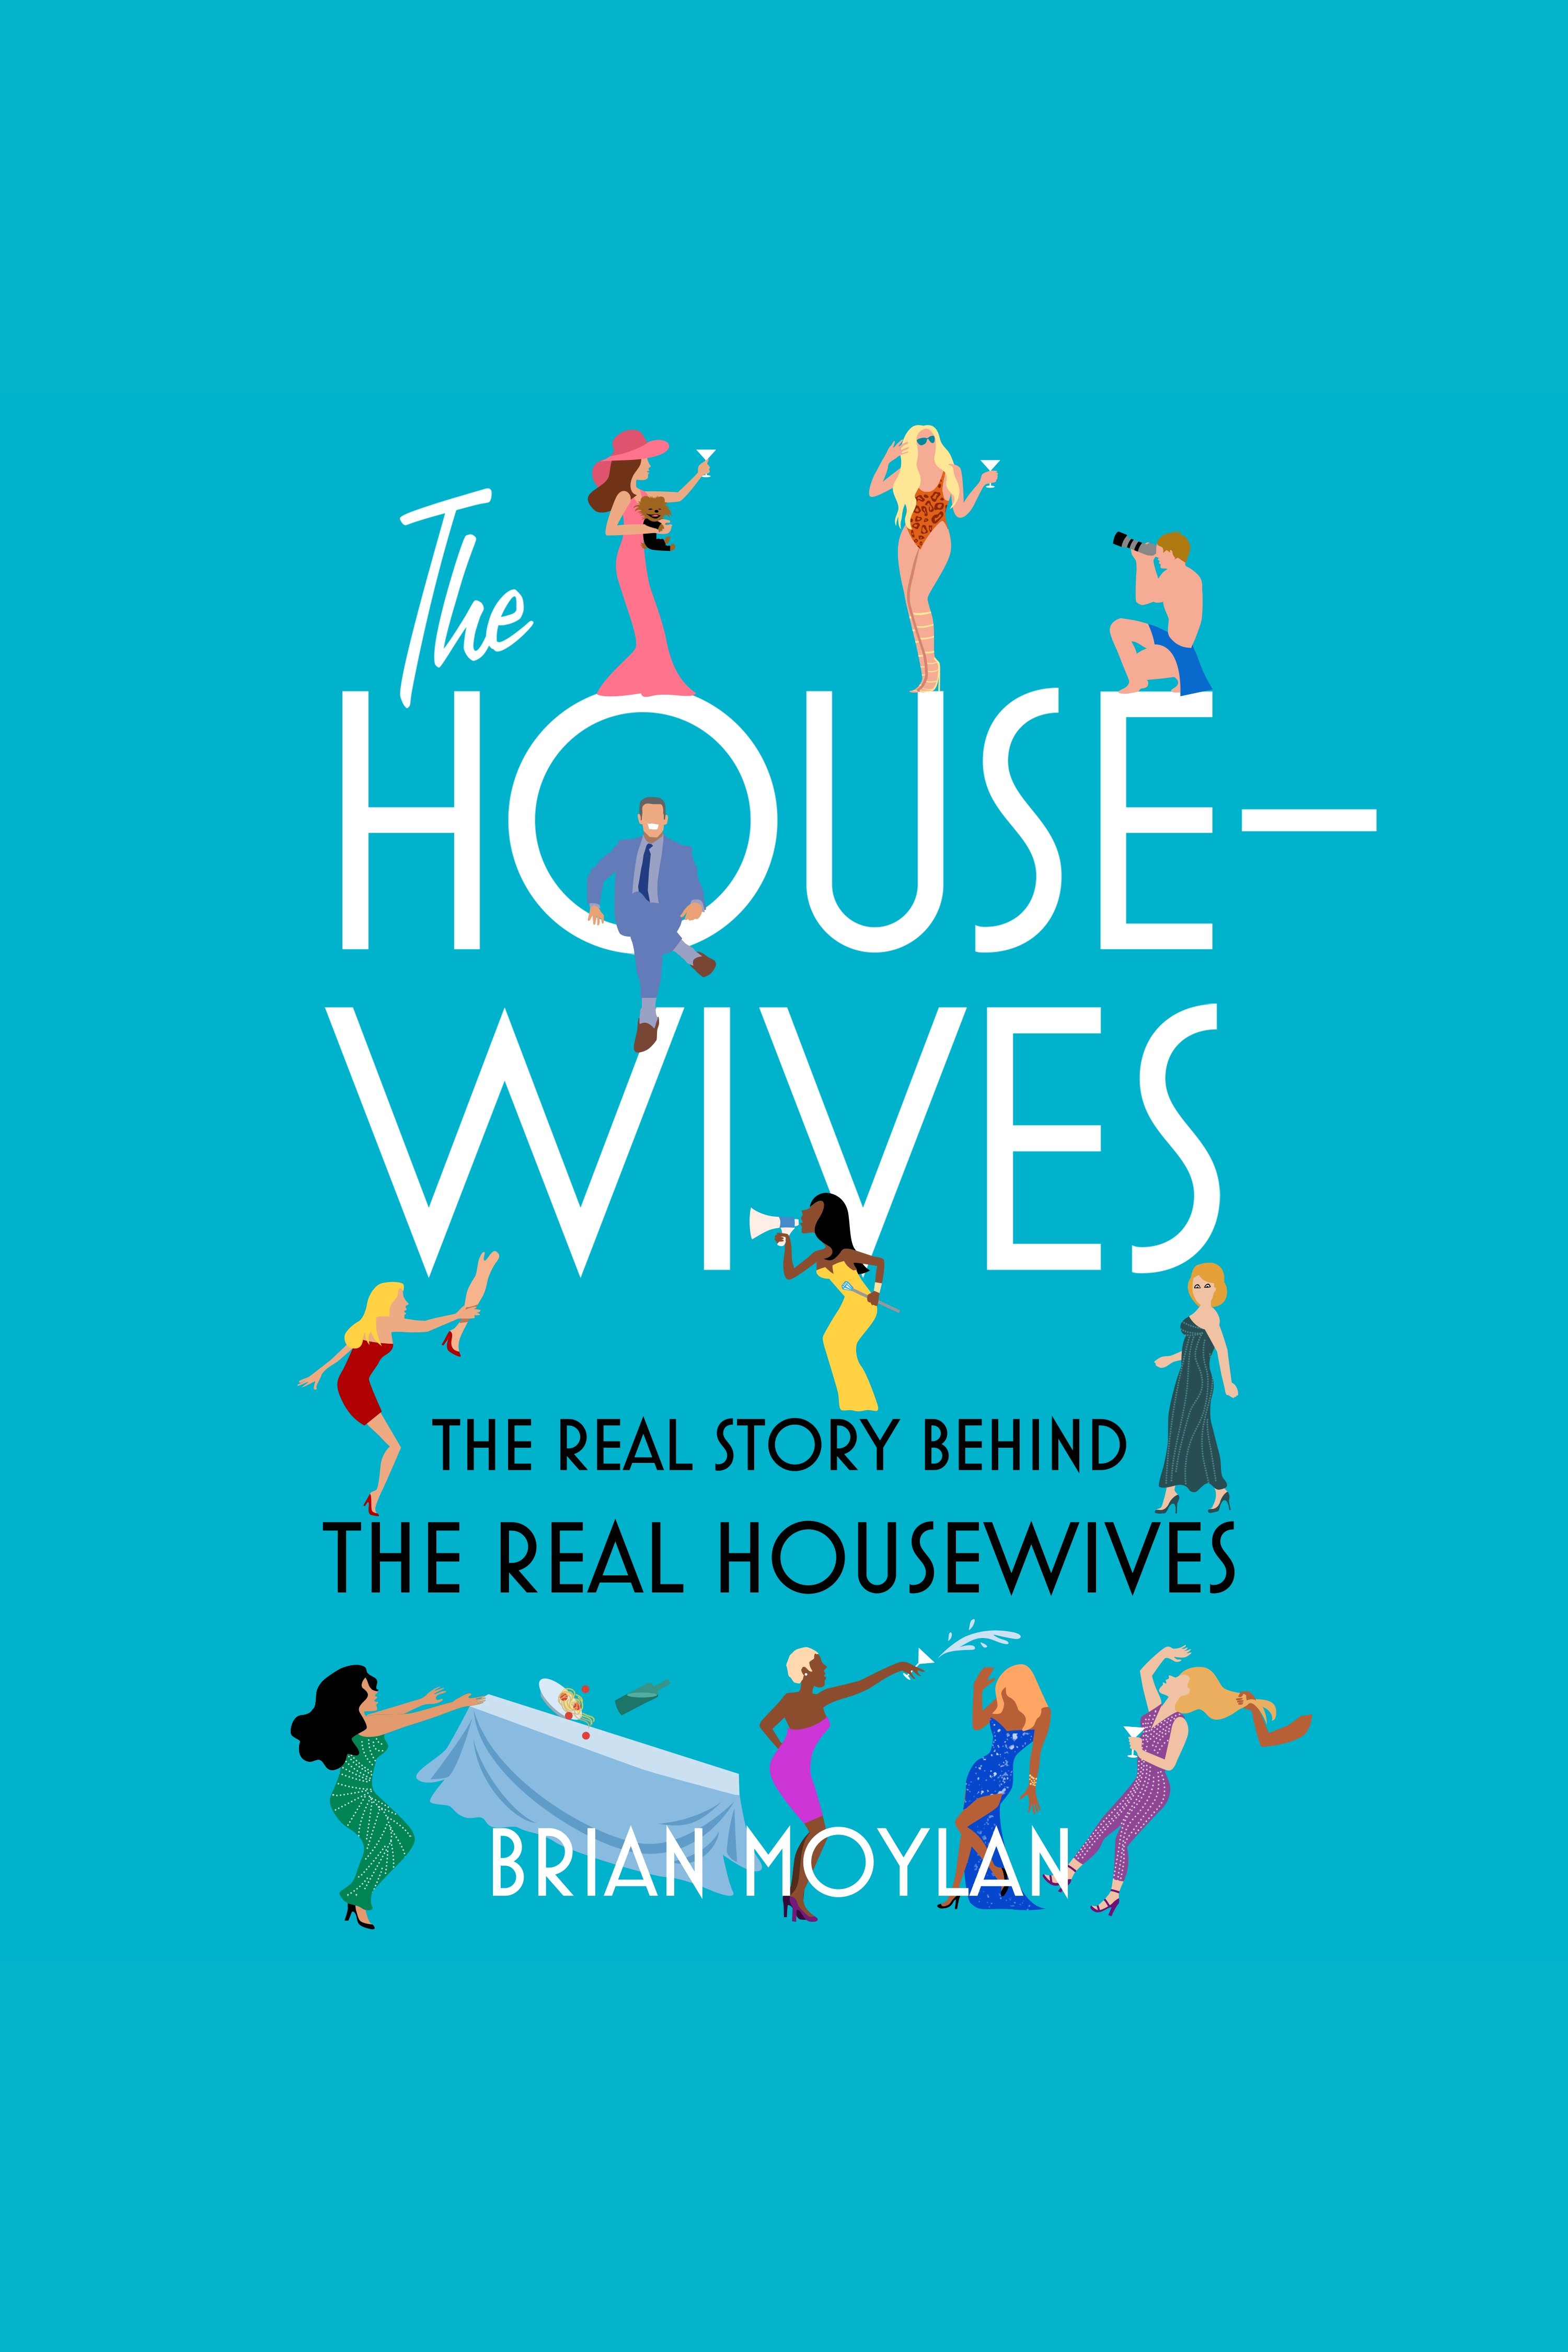 The Housewives The Real Story Behind the Real Housewives cover image